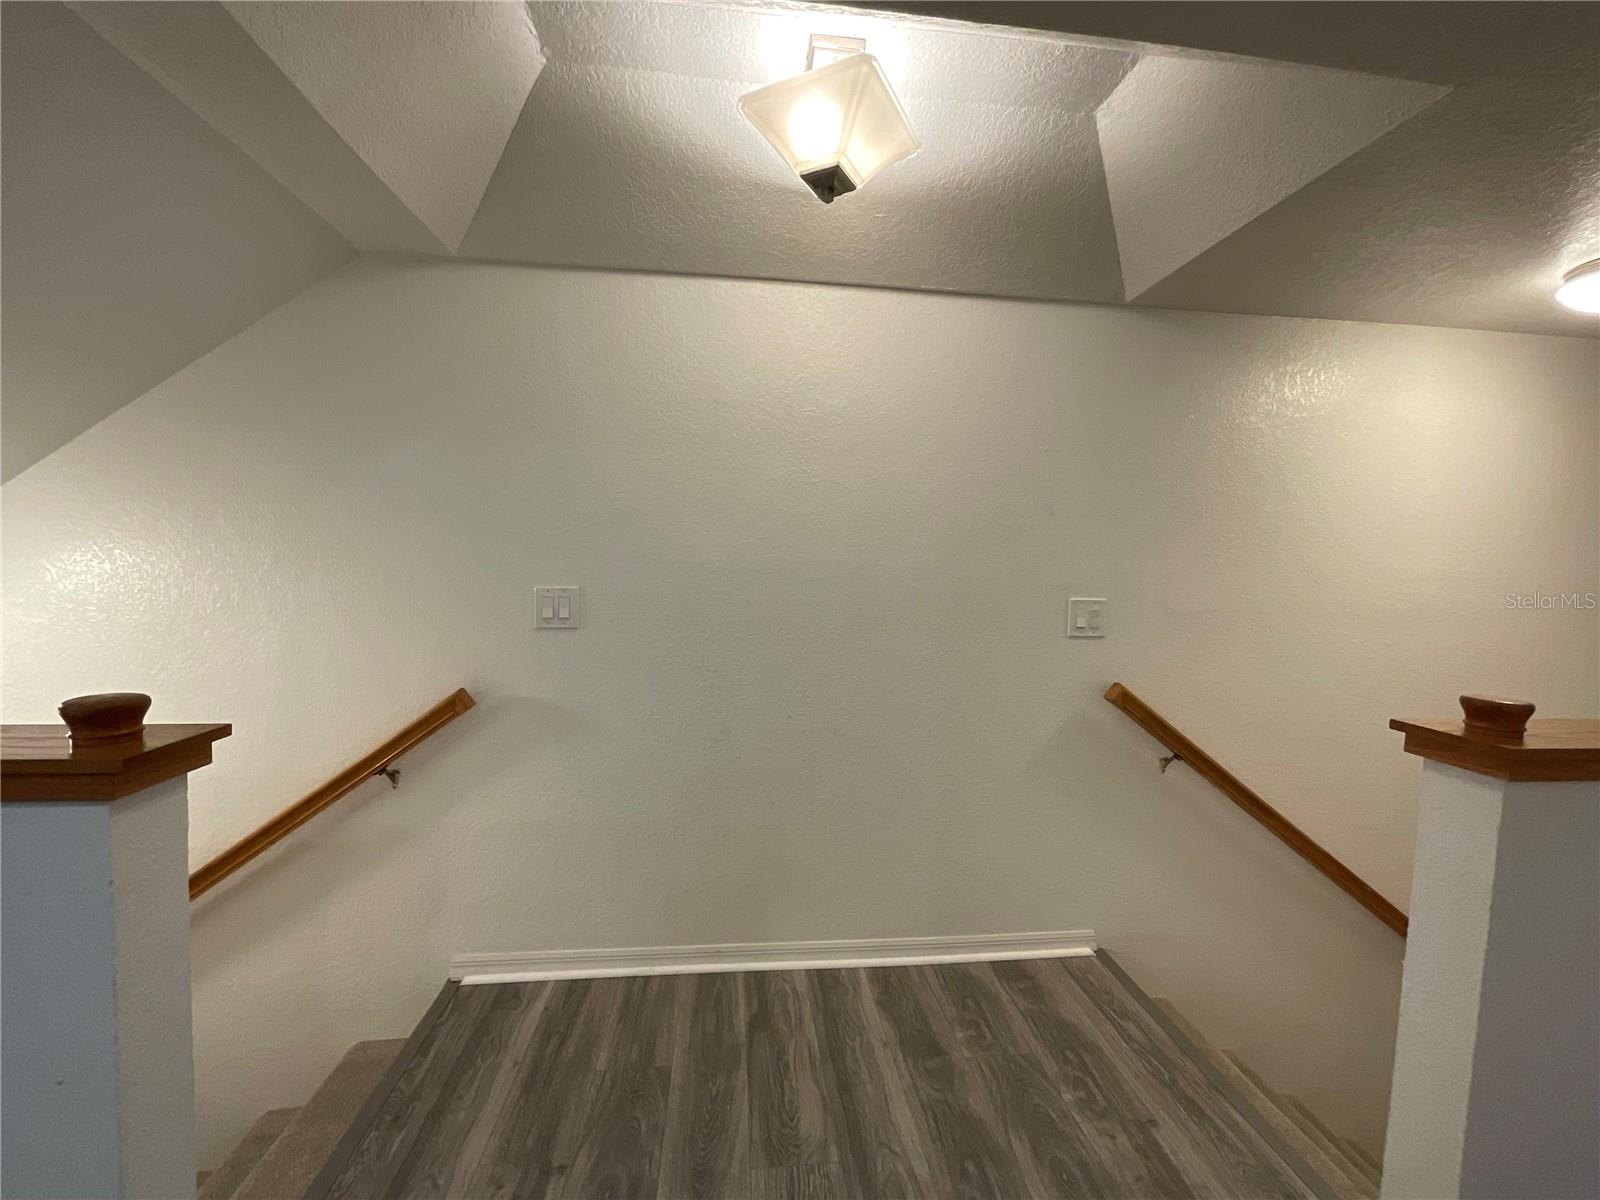 The Second Floor staircases. Right side to the front door, left side to the current 4th Bedroom, Bathroom, Large Family Room